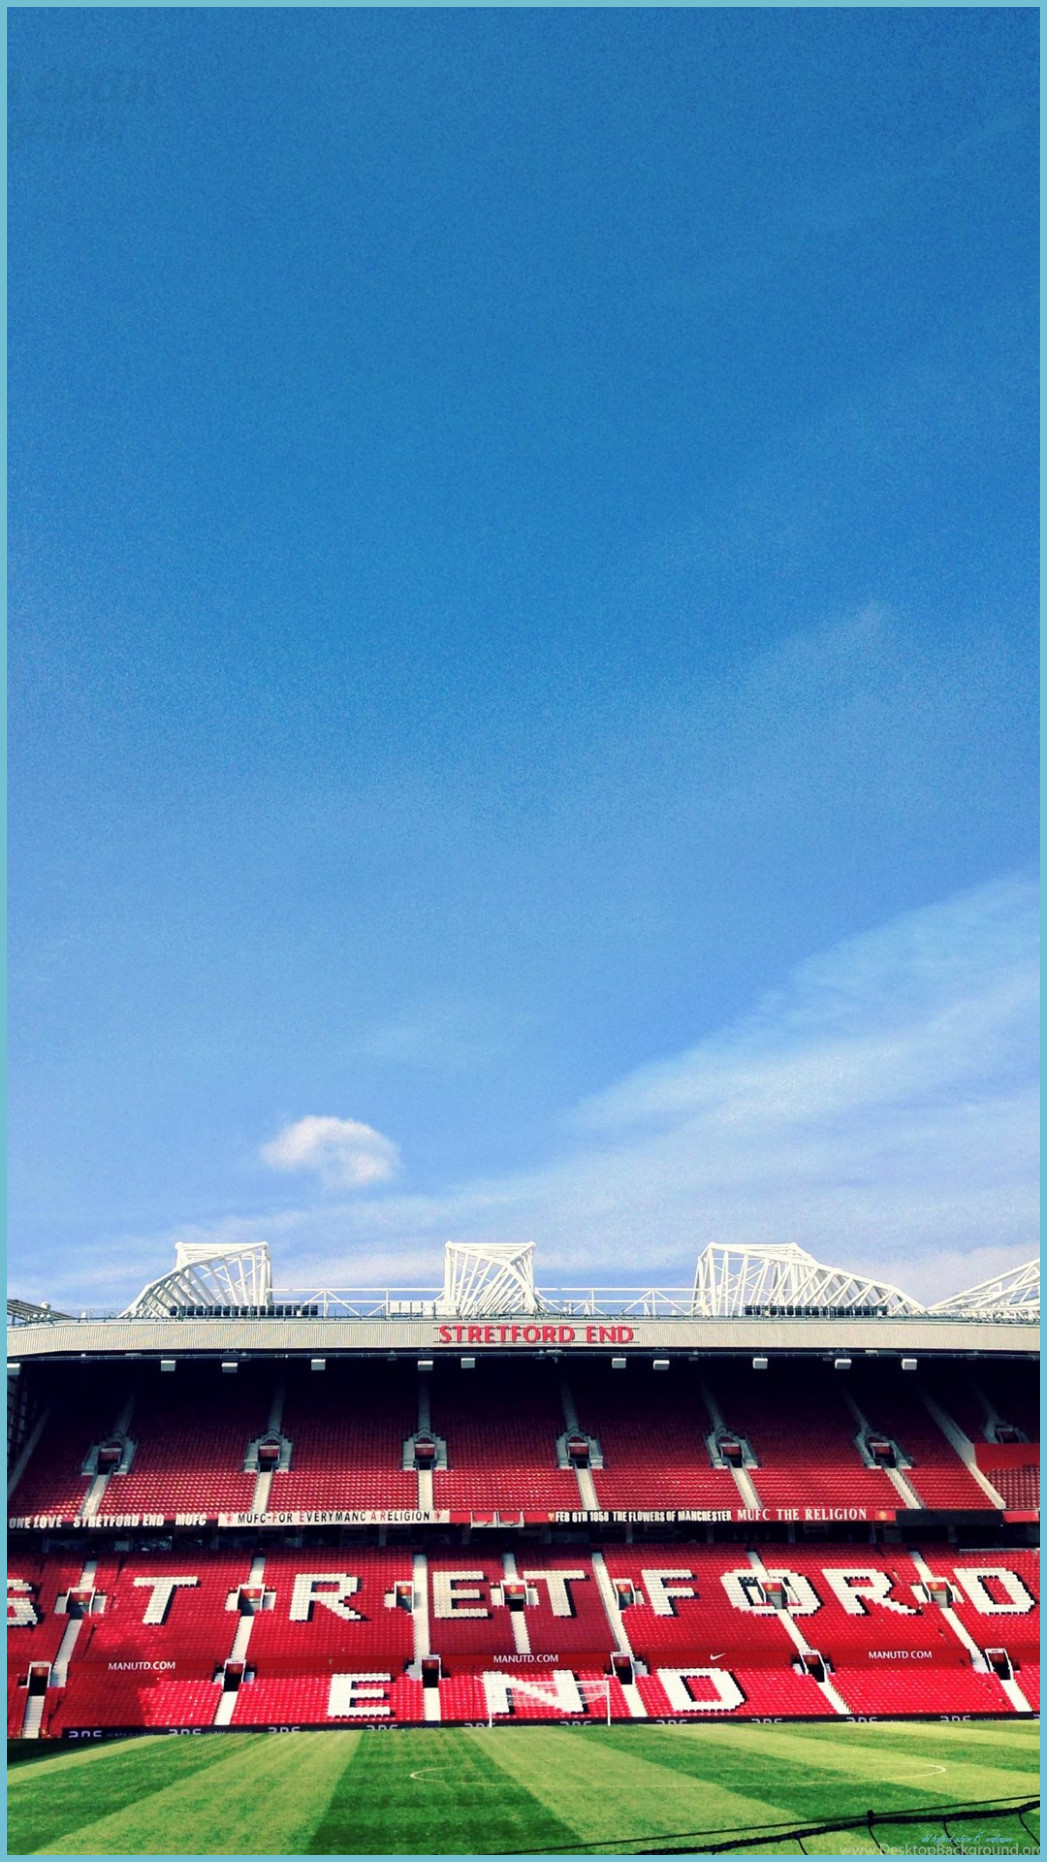 Man United's Old Trafford Stadium HD Wallpaper For Mobile Free Trafford iPhone 6 Wallpaper